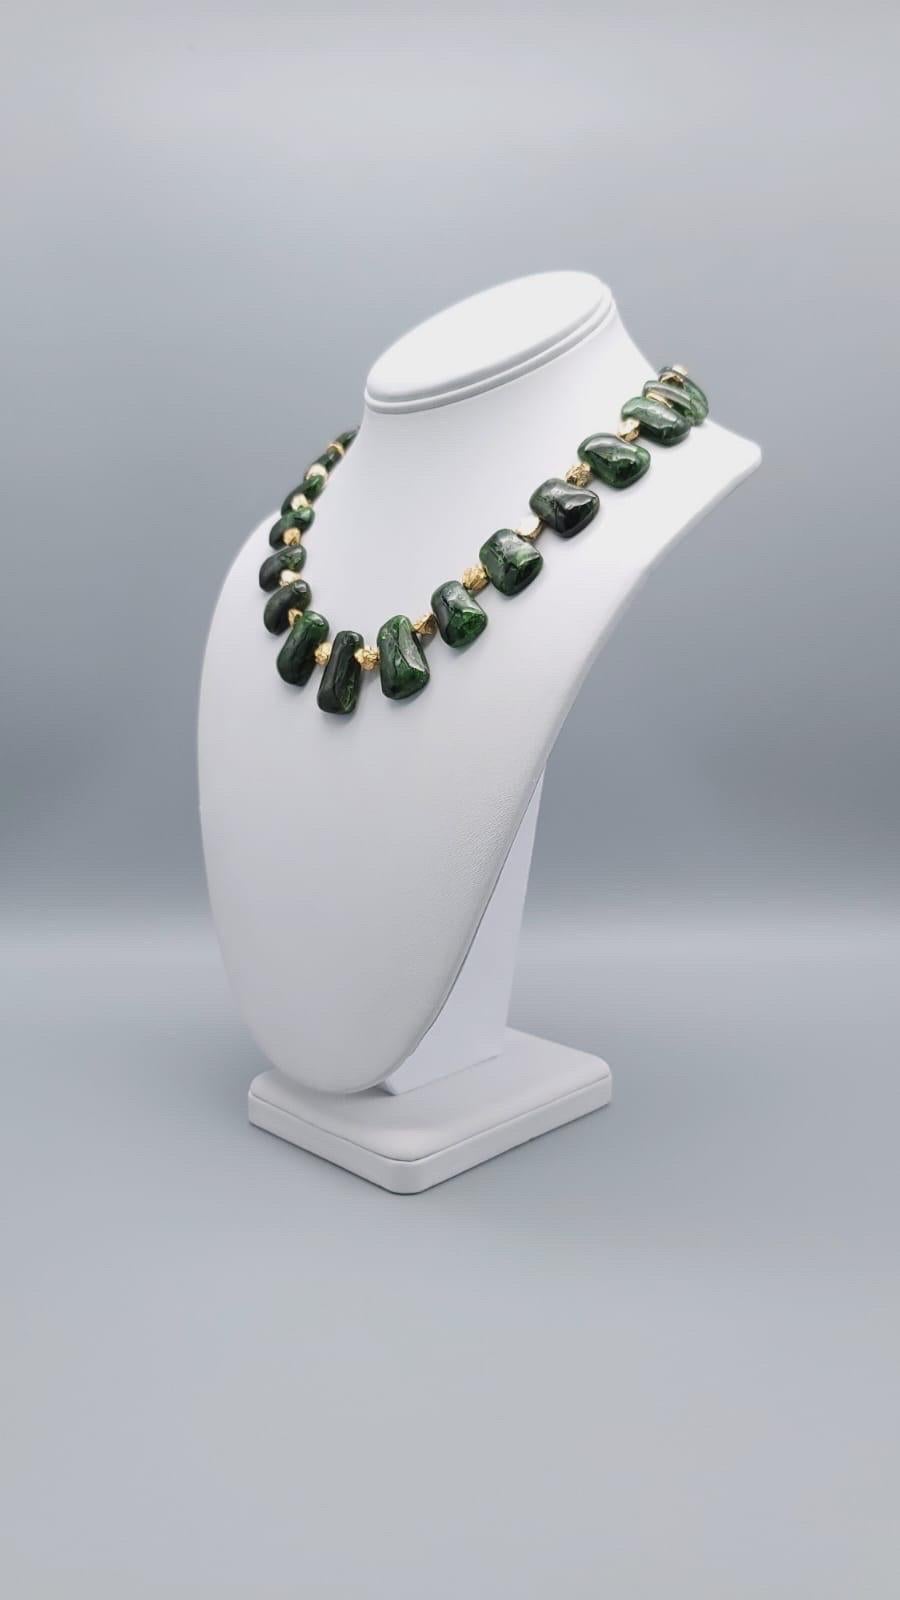 A.Jeschel Richly colored Chrome Diopside necklace 12